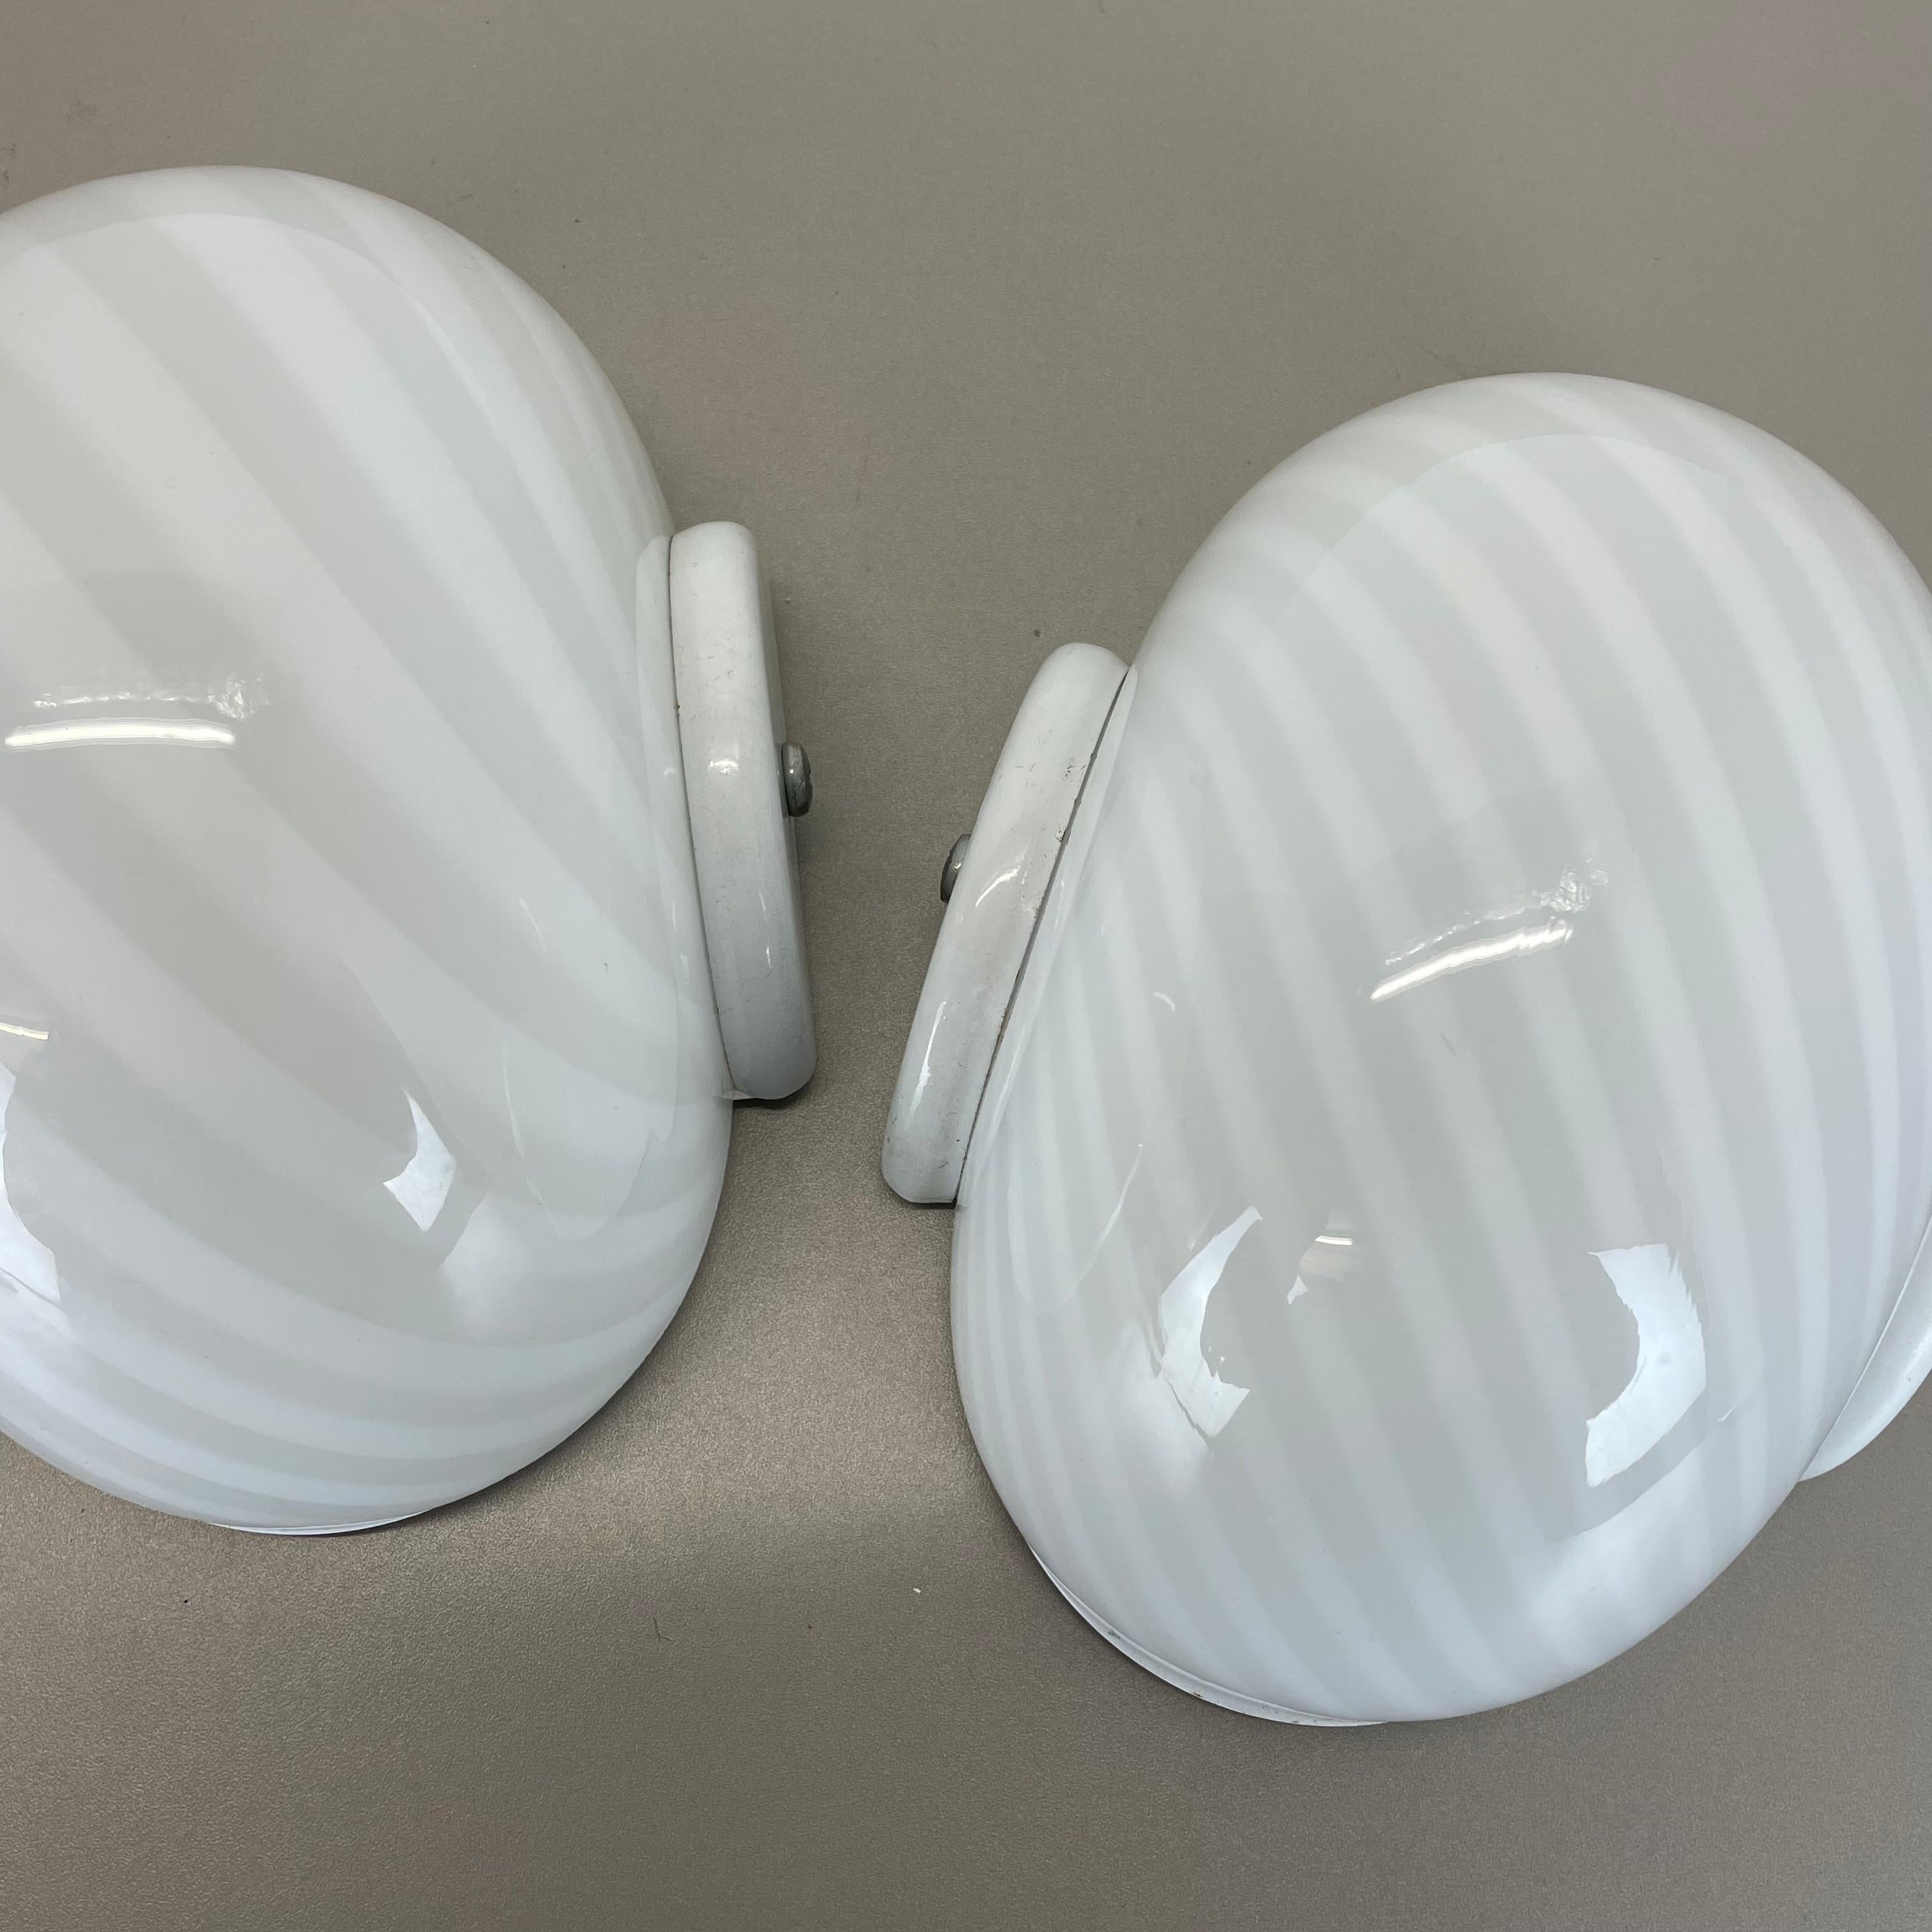 Set of Two Murano Swirl Glass Wall Light Sconces Vetri Murano, Italy, 1980s For Sale 1